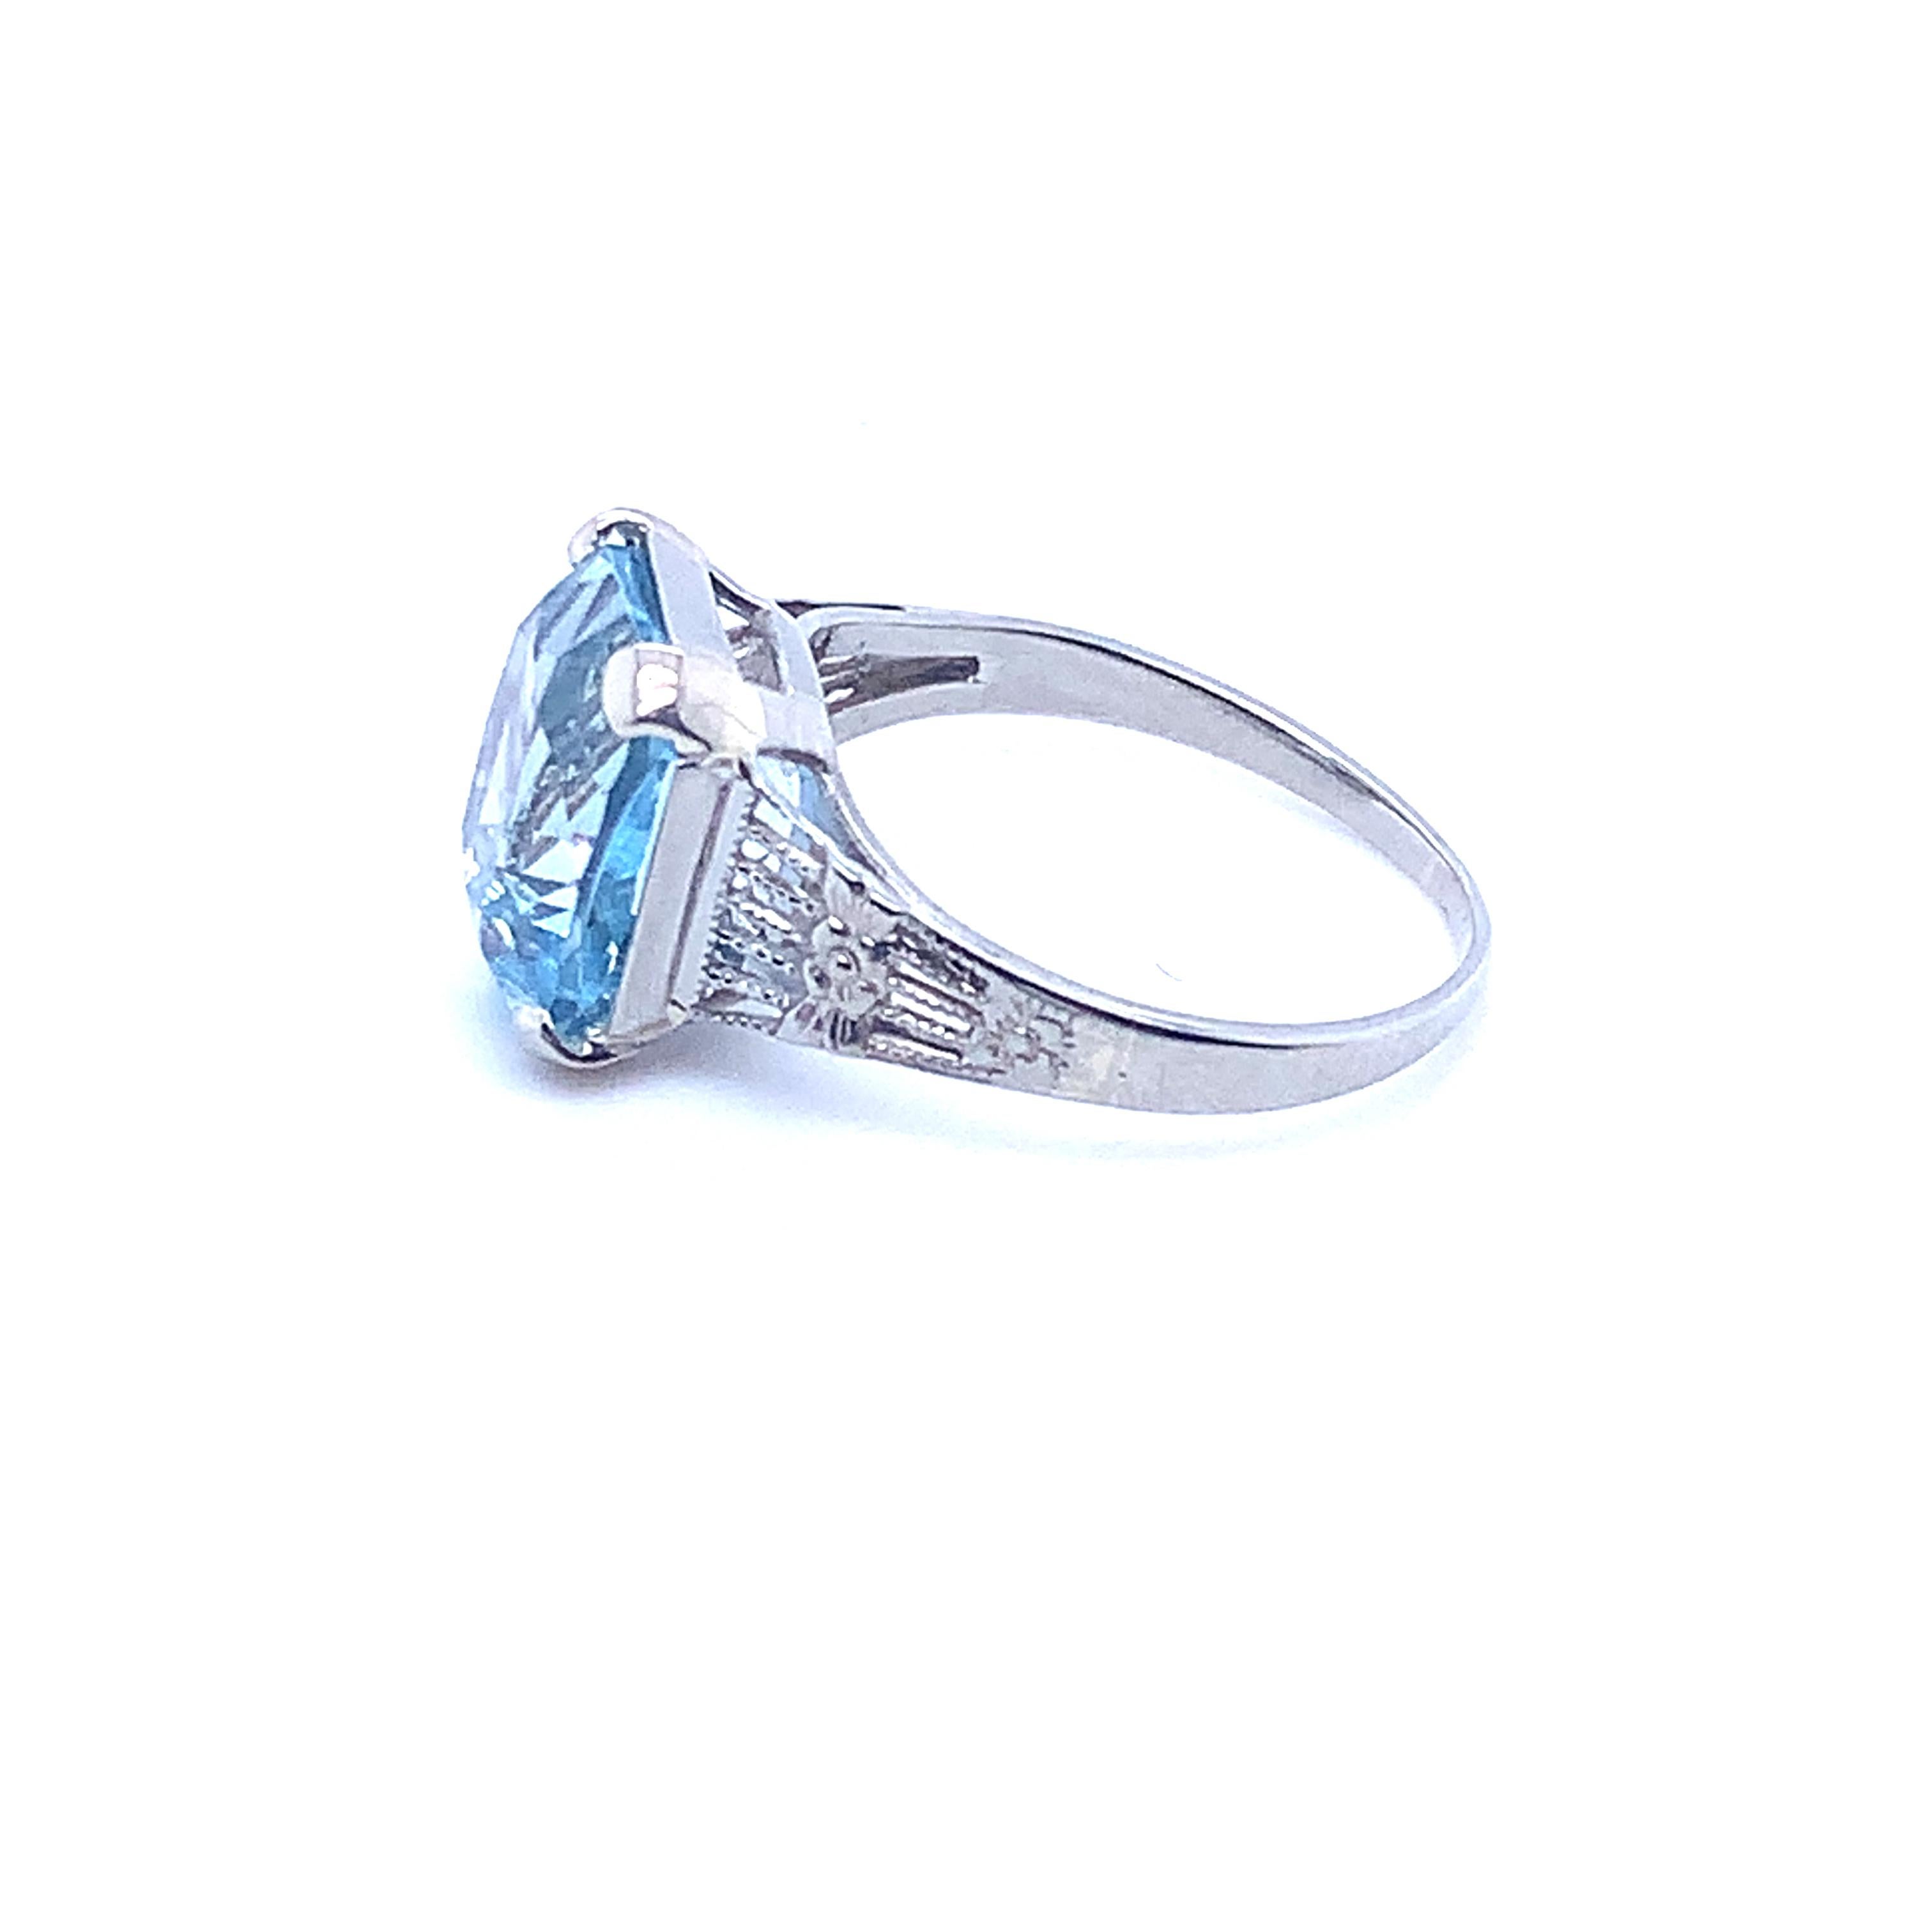 Art Deco 14K white gold filigree ring featuring 3.34ct antique cushion cut aquamarine, measuring about 10mm x 9mm. The color of the gem is best represented on the hand, not as blue as shown in the light box. The ring fits a size 4 3/4 finger, weighs